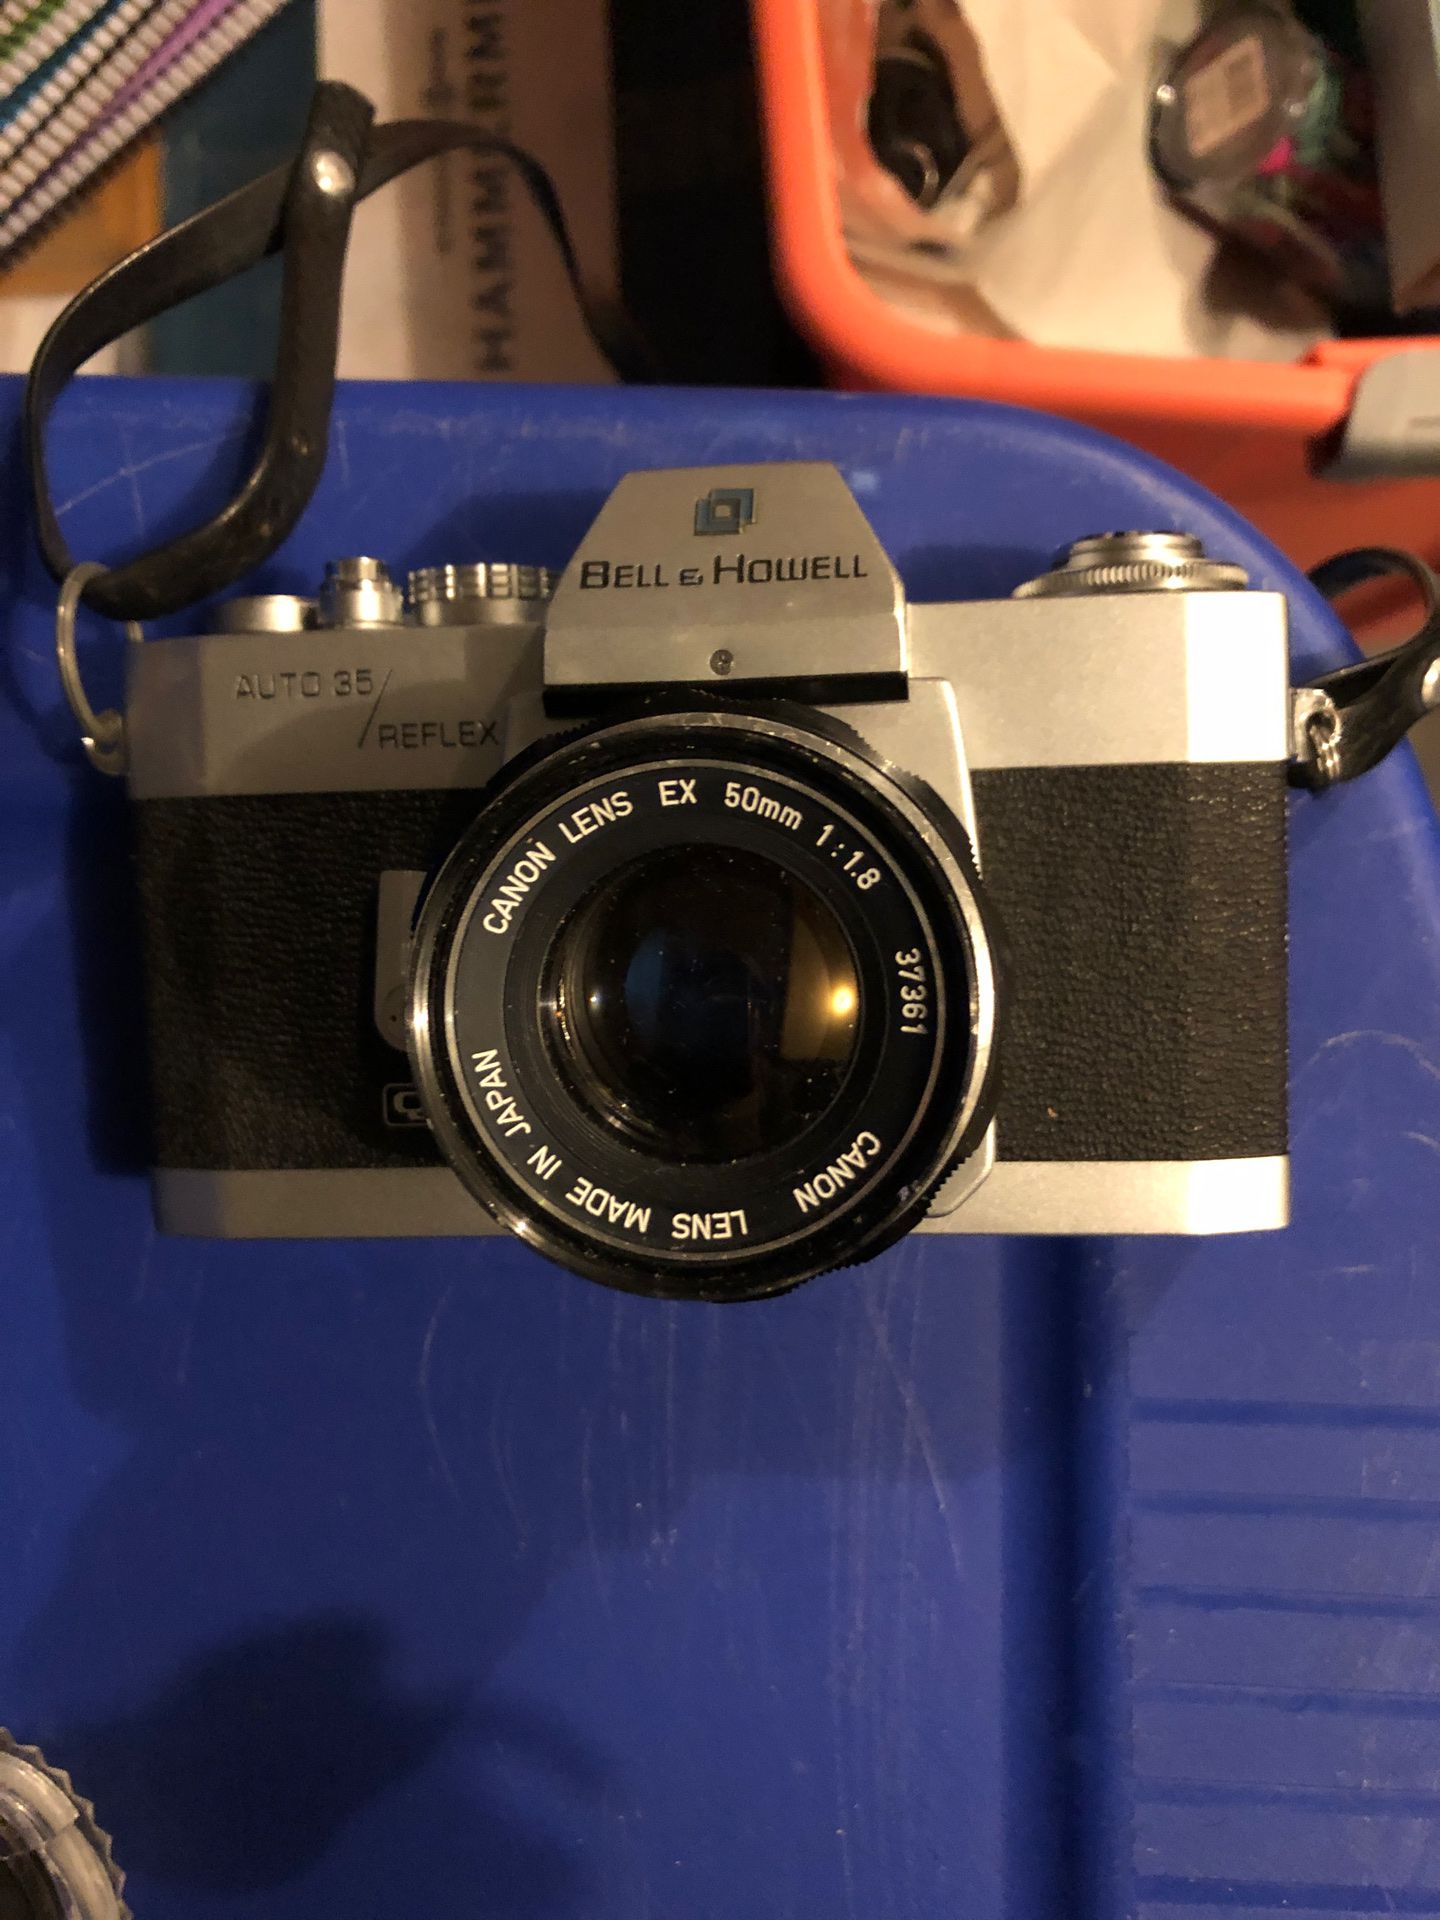 BELL AND HOWELL CAMERA